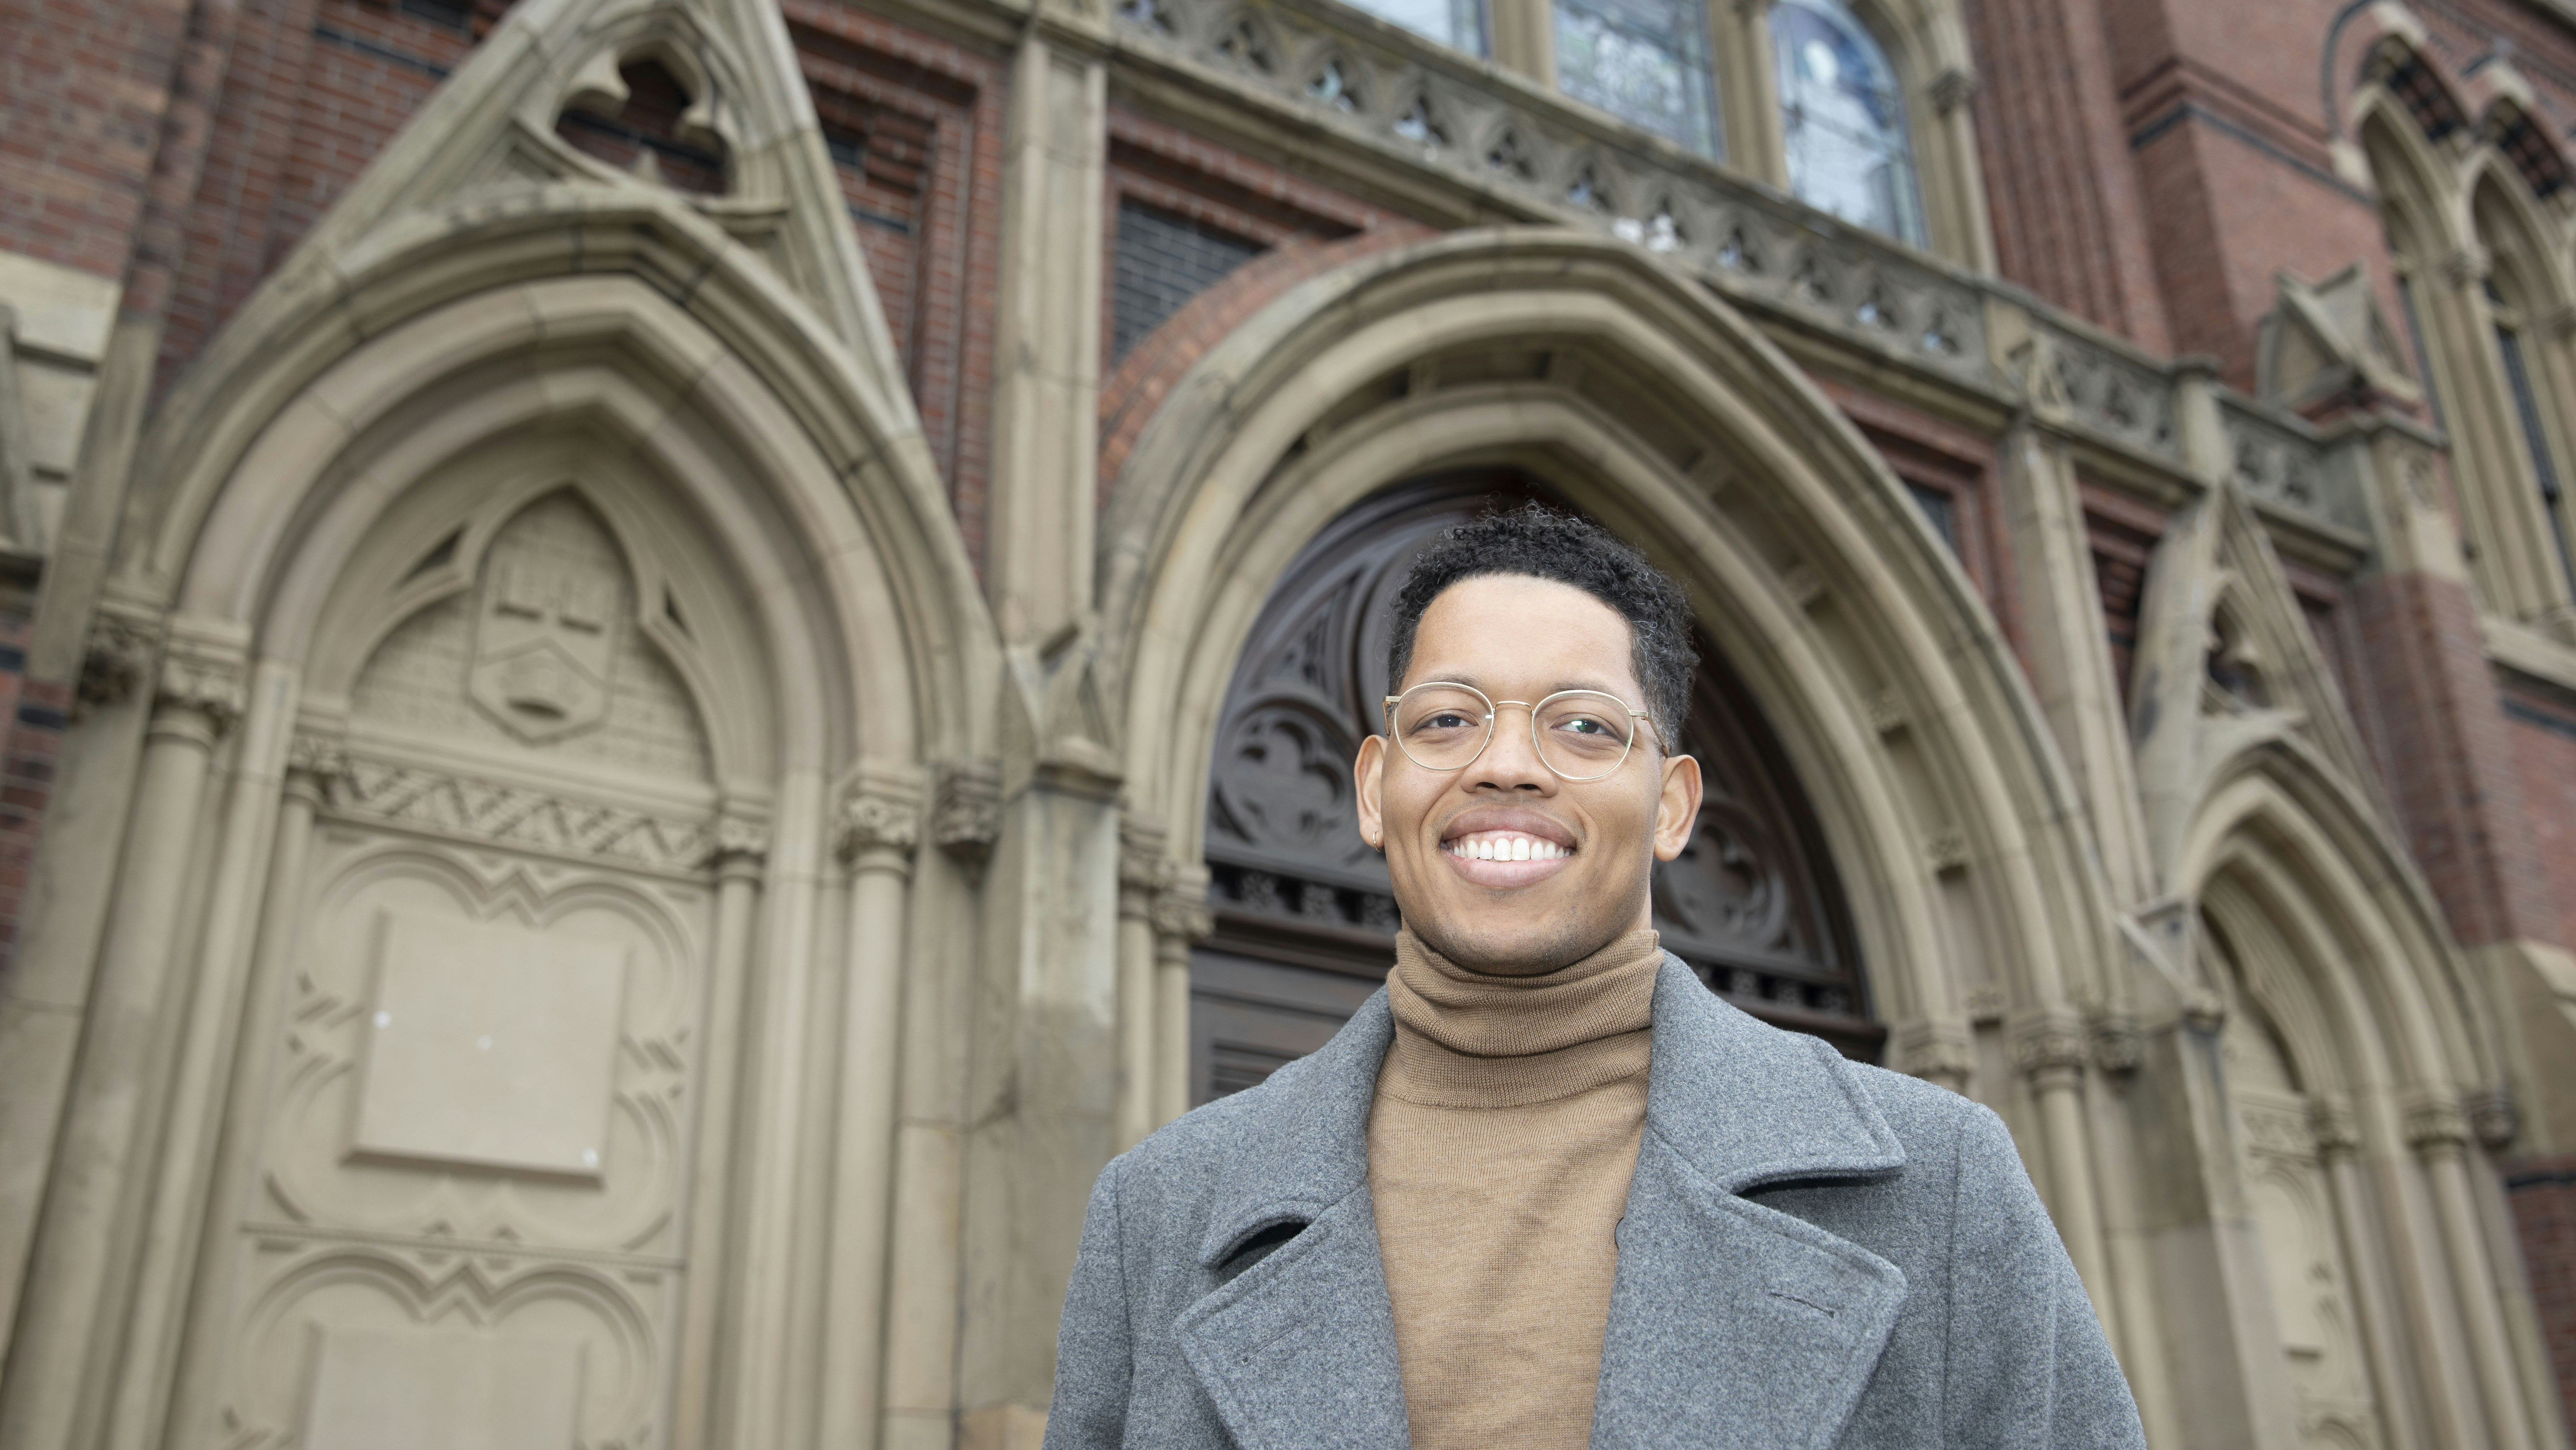 A smiling man in a turtleneck sweater and overcoat stands outside of Memorial Hall